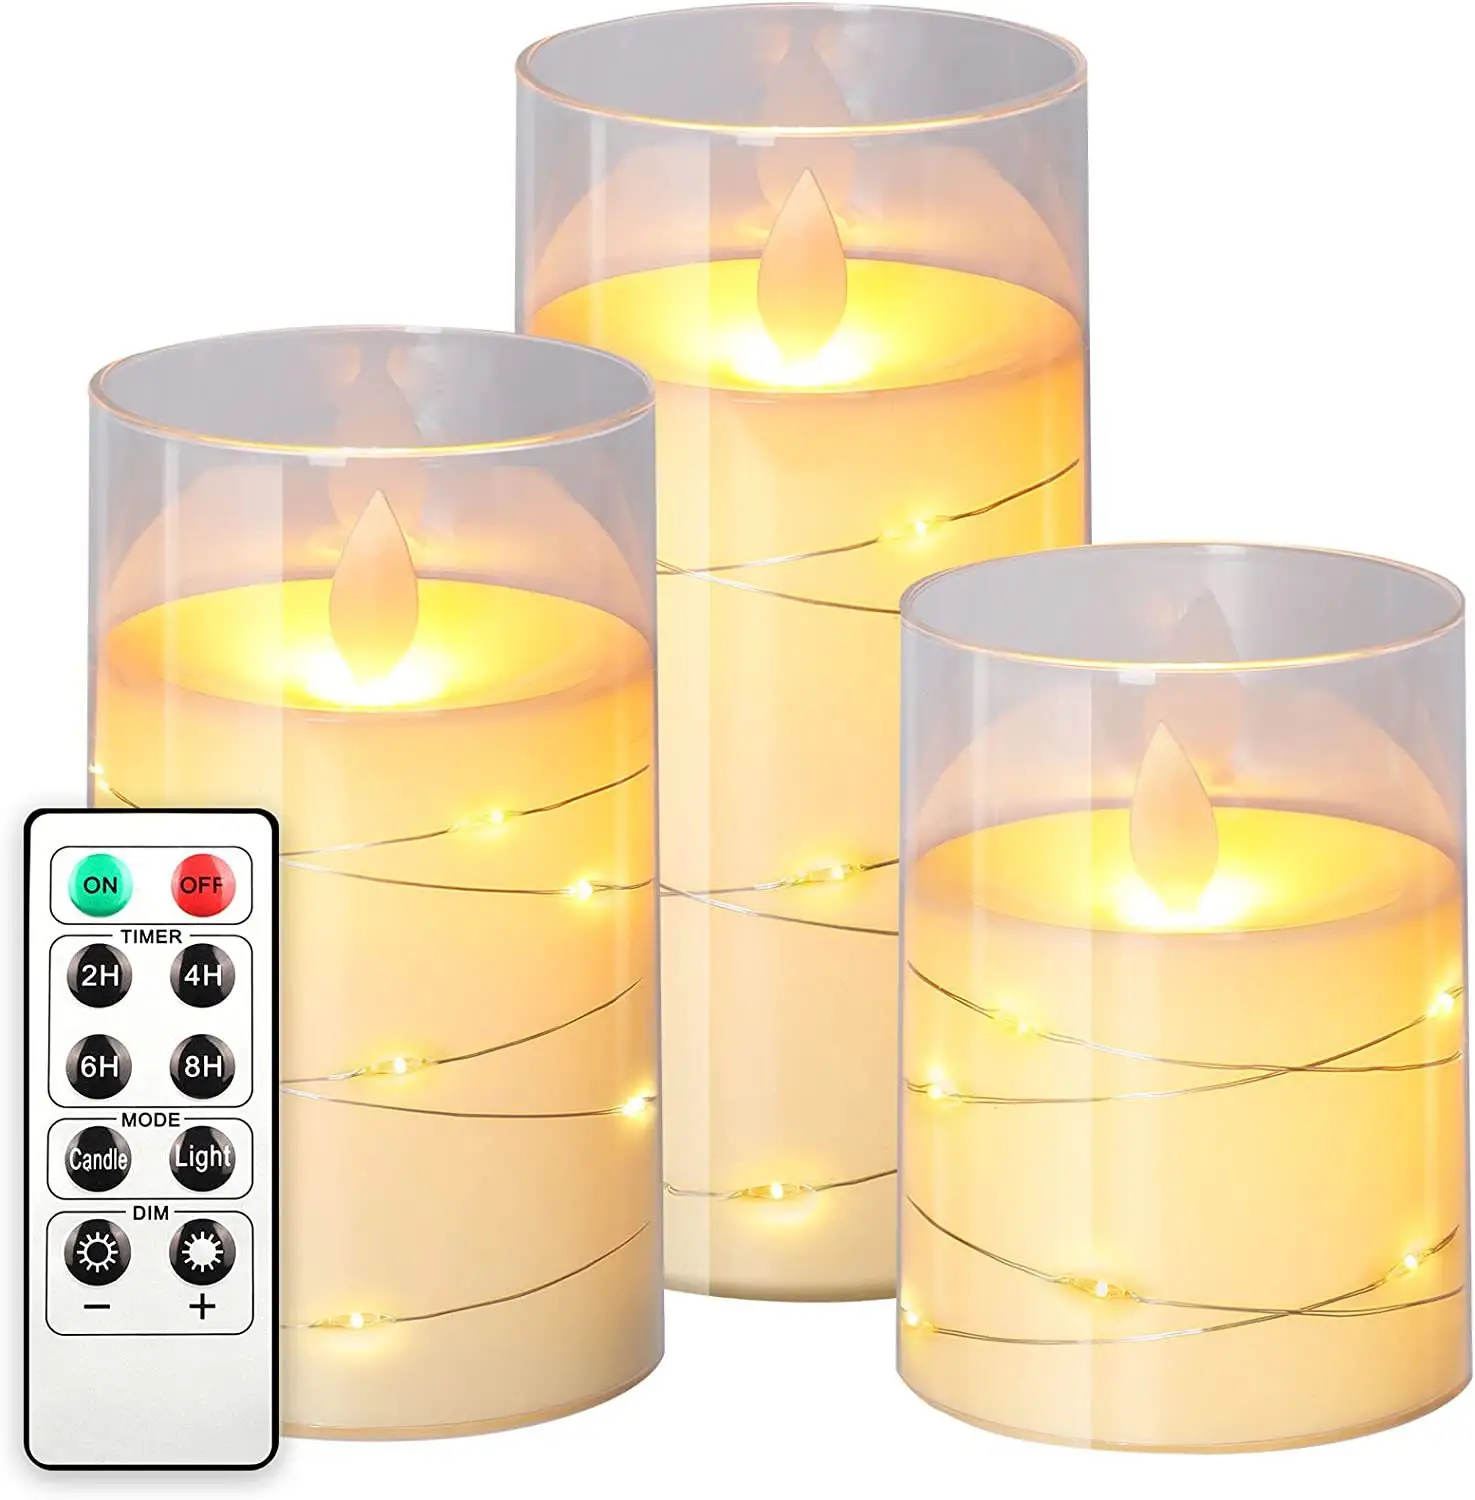 Acrylic Glass Flameless Candles Flickering LED Battery Operated Power Pillar Candles with LED Strip for Home Decoration